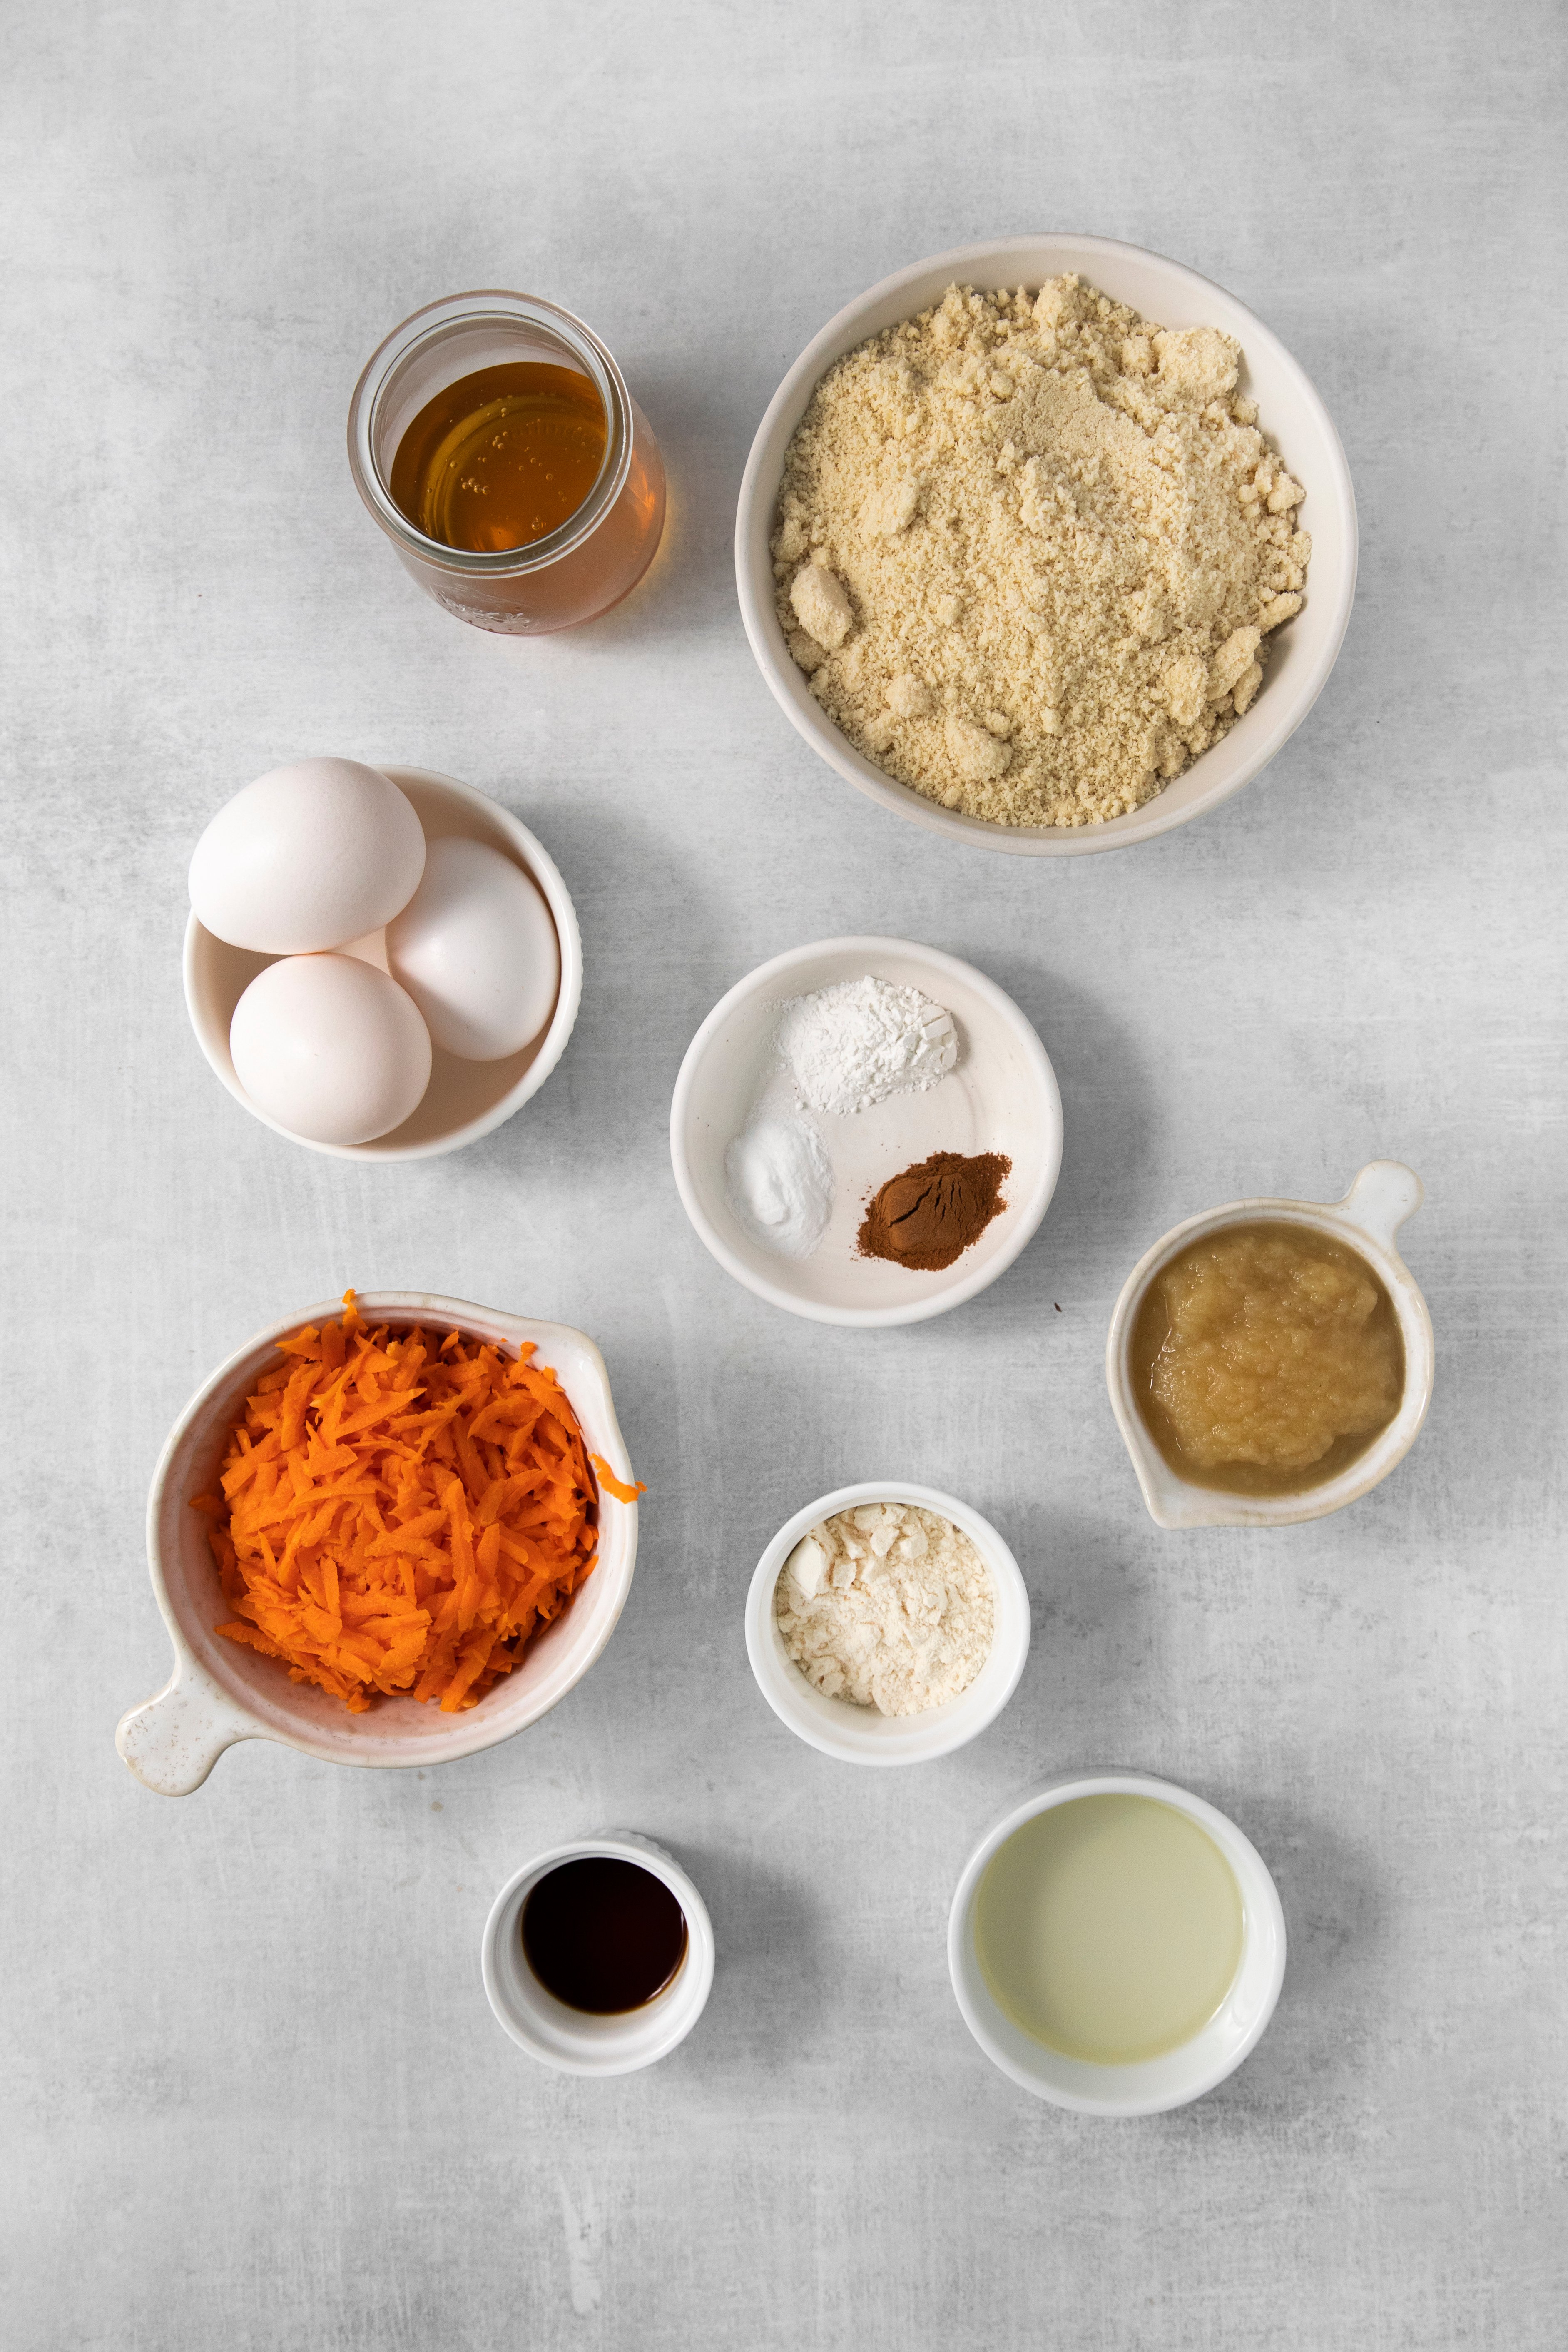 ingredients for healthy carrot cake recipe.